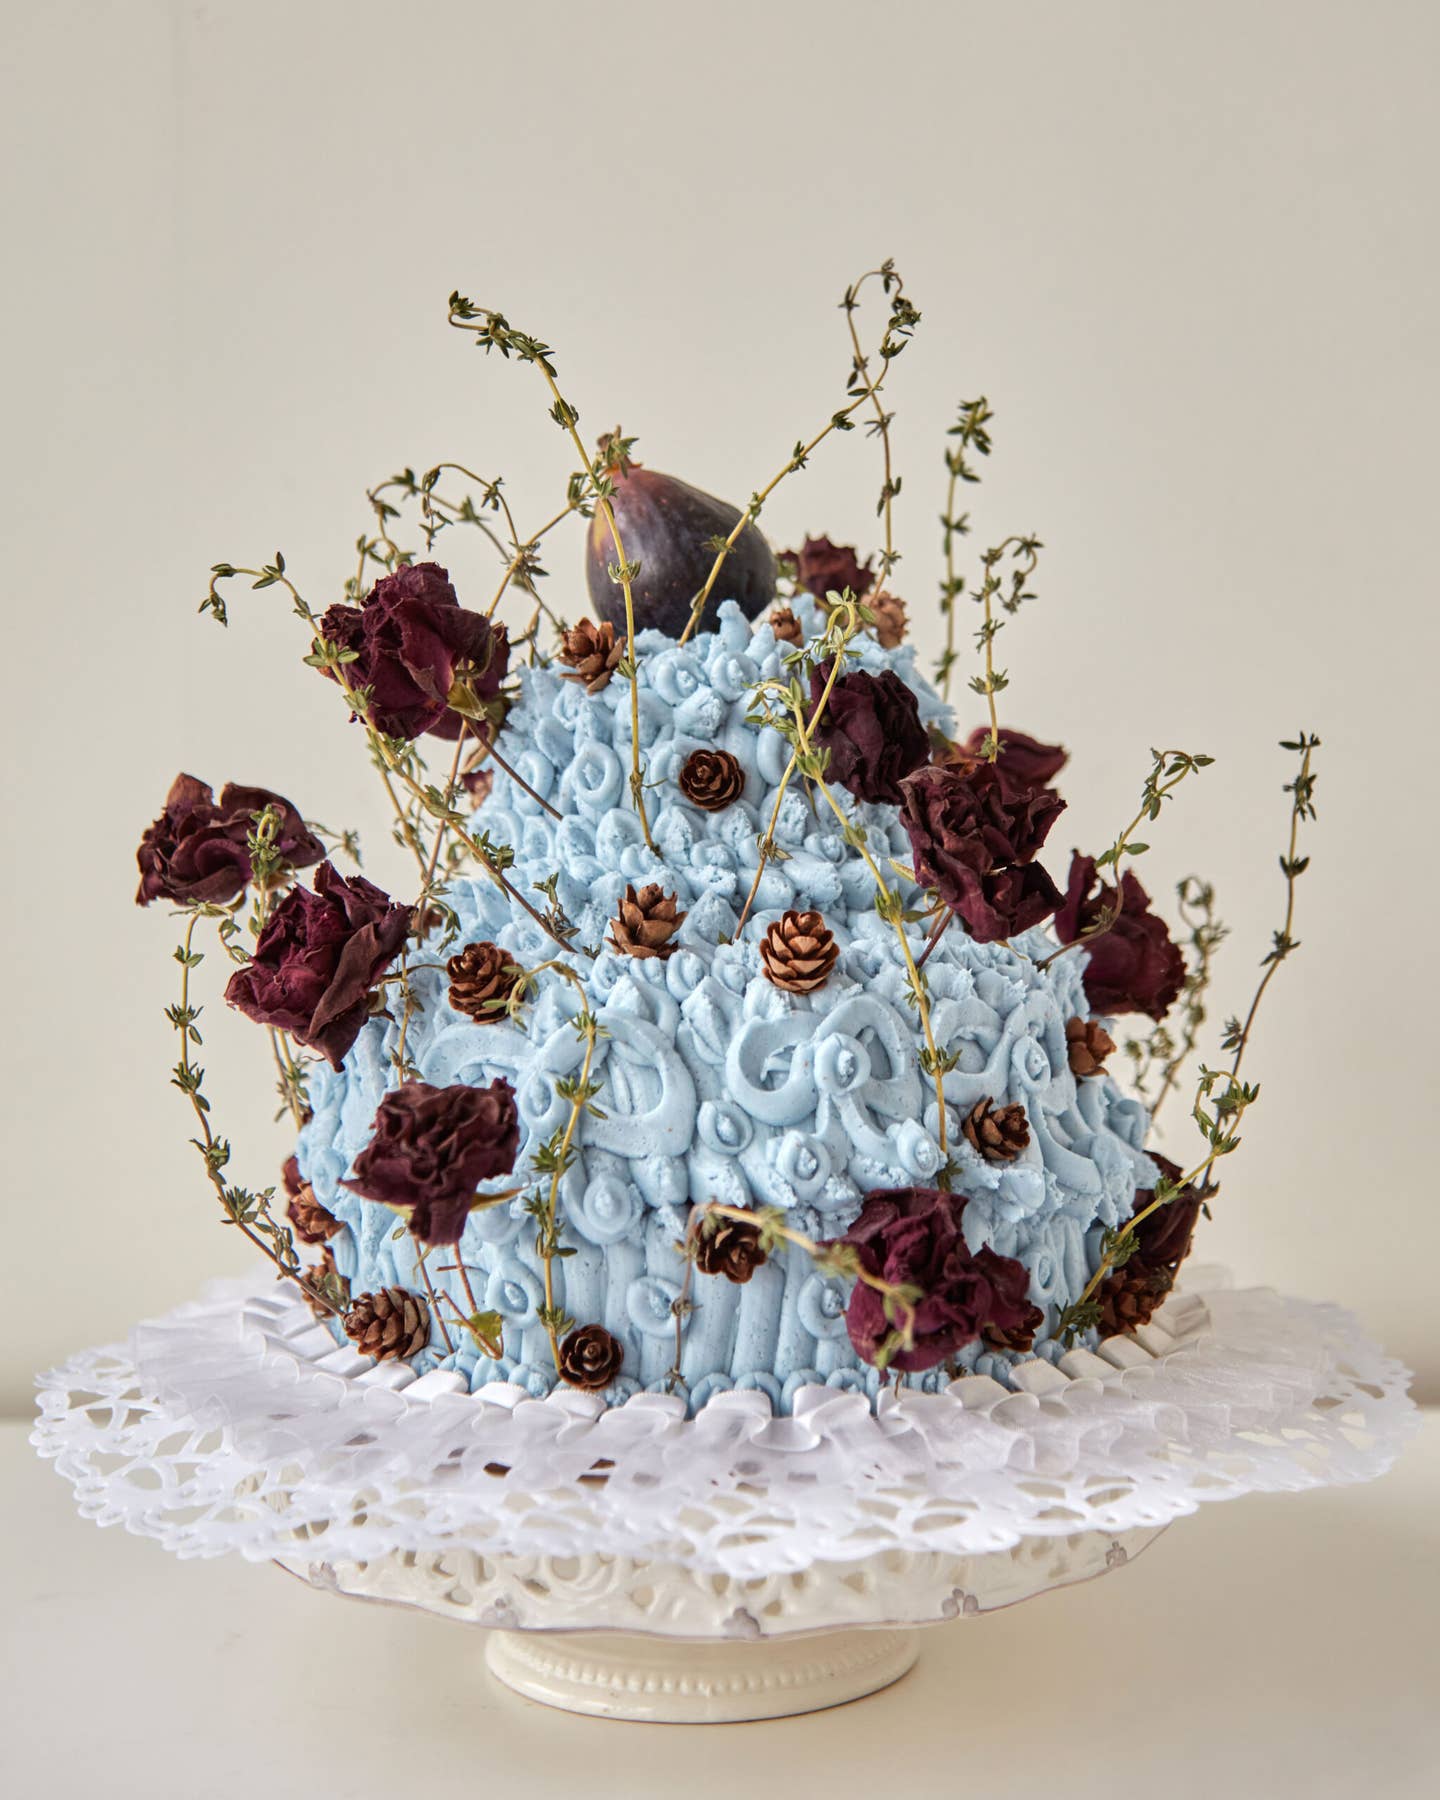 How to Make Those Fabulously Unhinged Cakes You Saw on Instagram